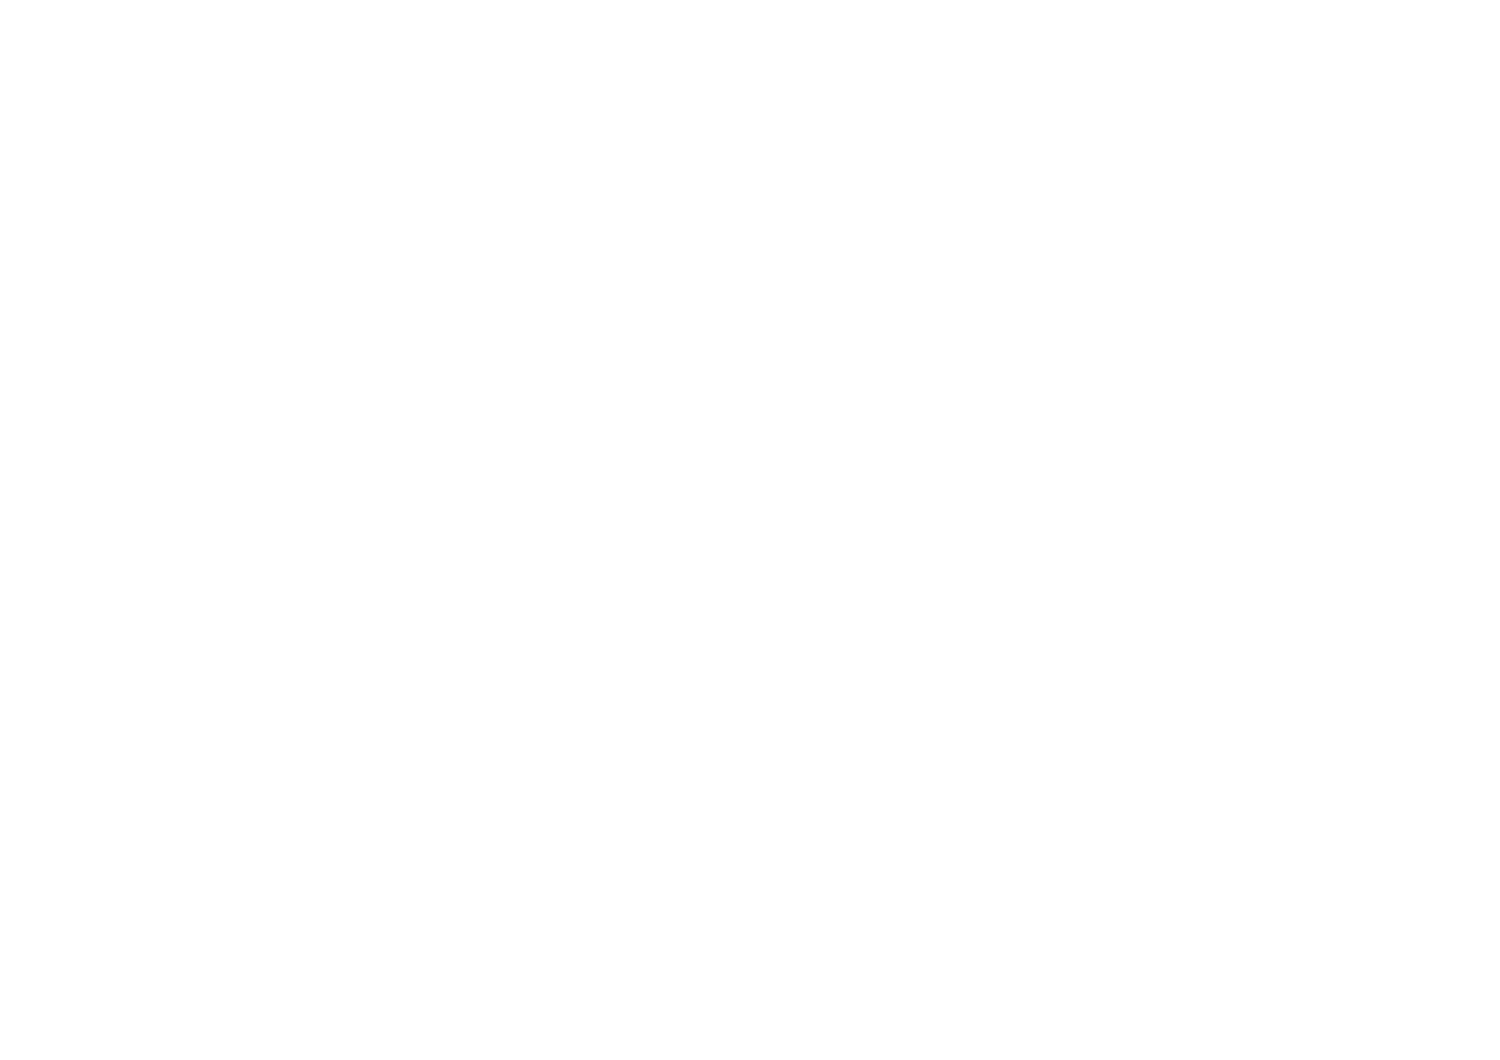 MEADOW PRODUCTIONS